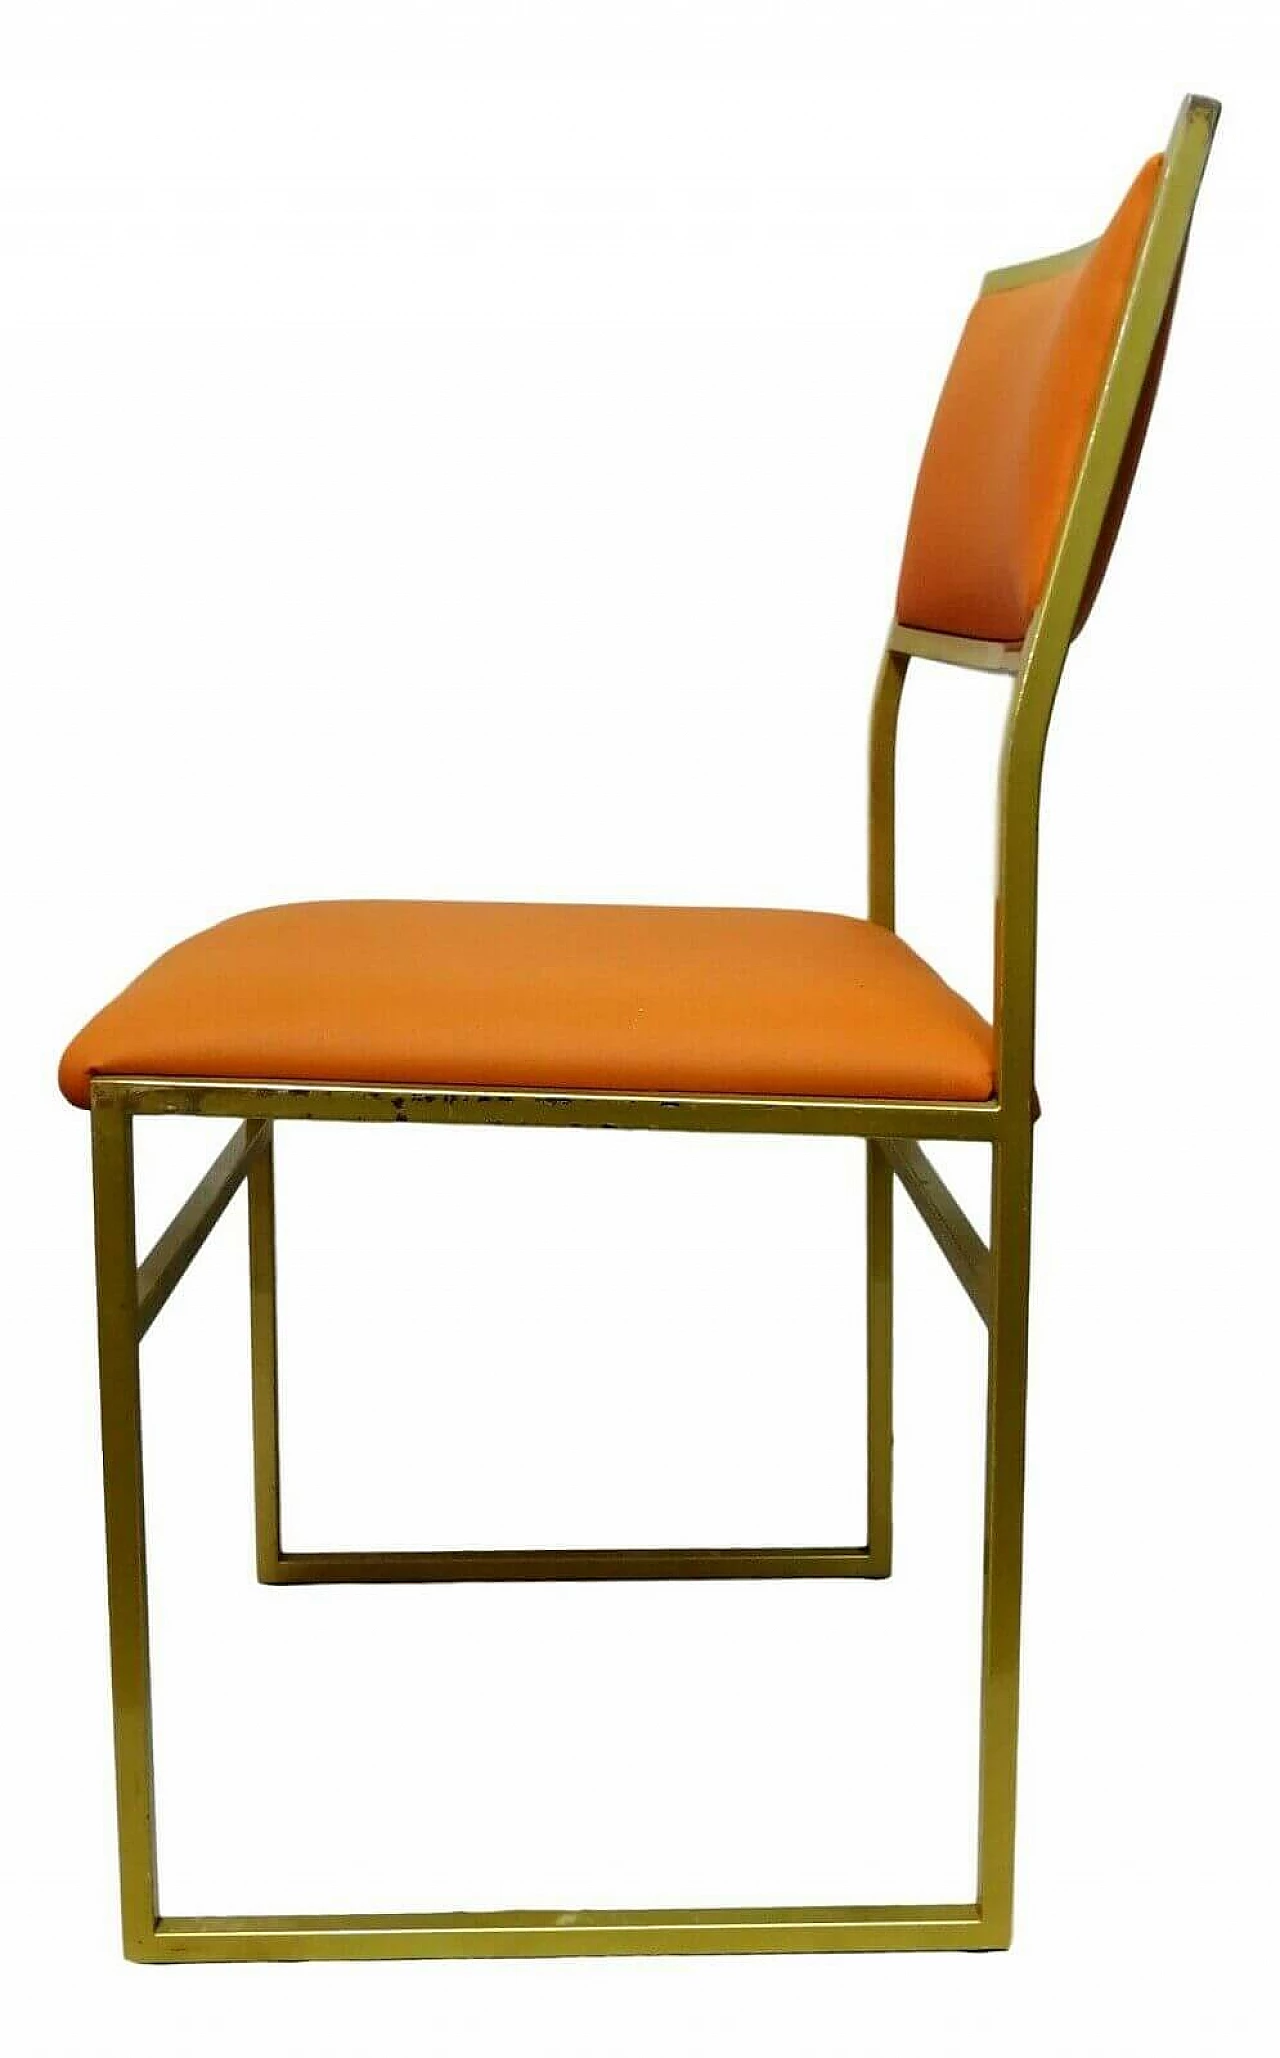 Metal chair and apricot-colored seat, 70s 1166228